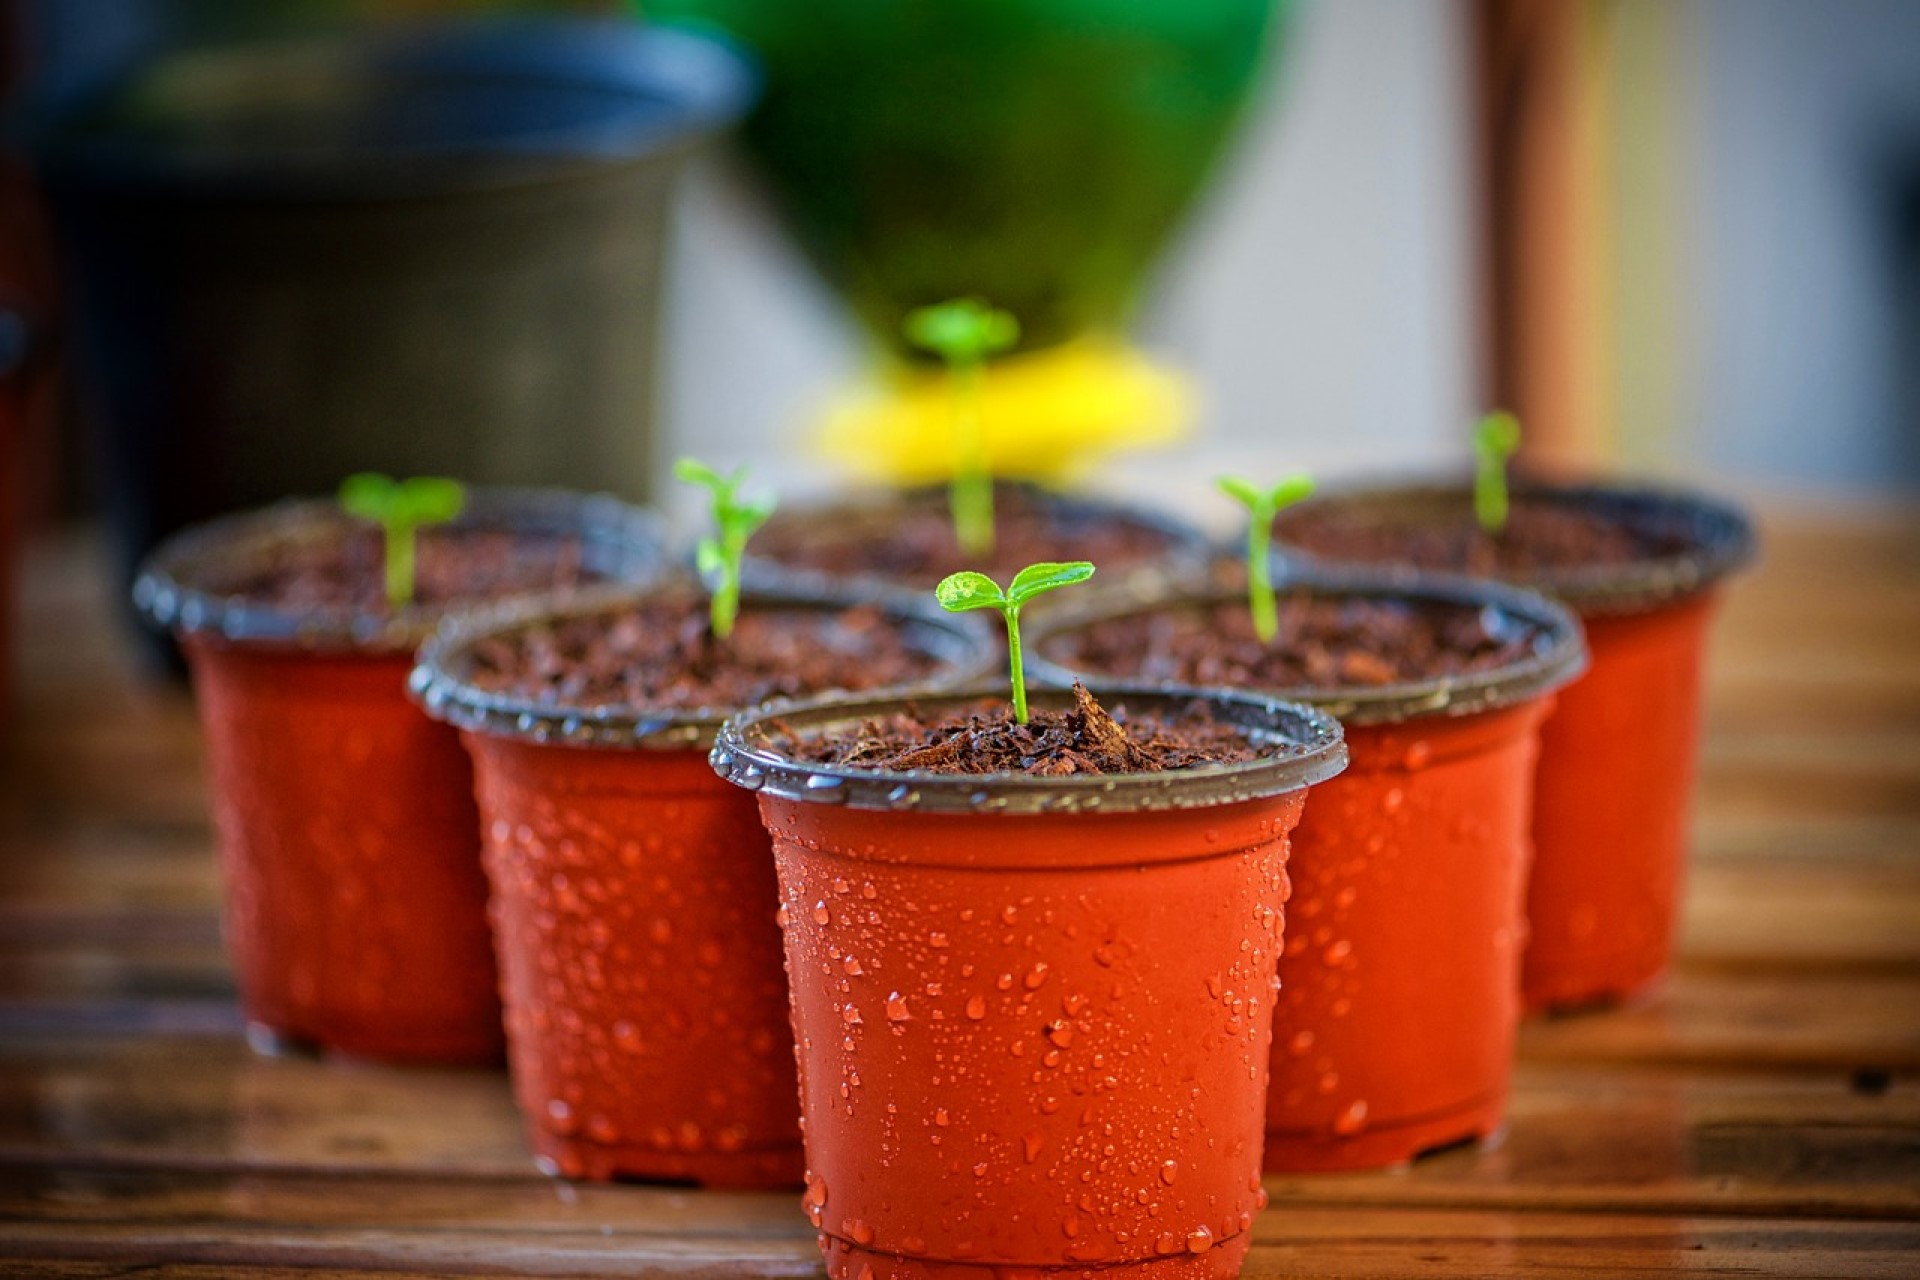 Recycle Plastic Cups Into Plants